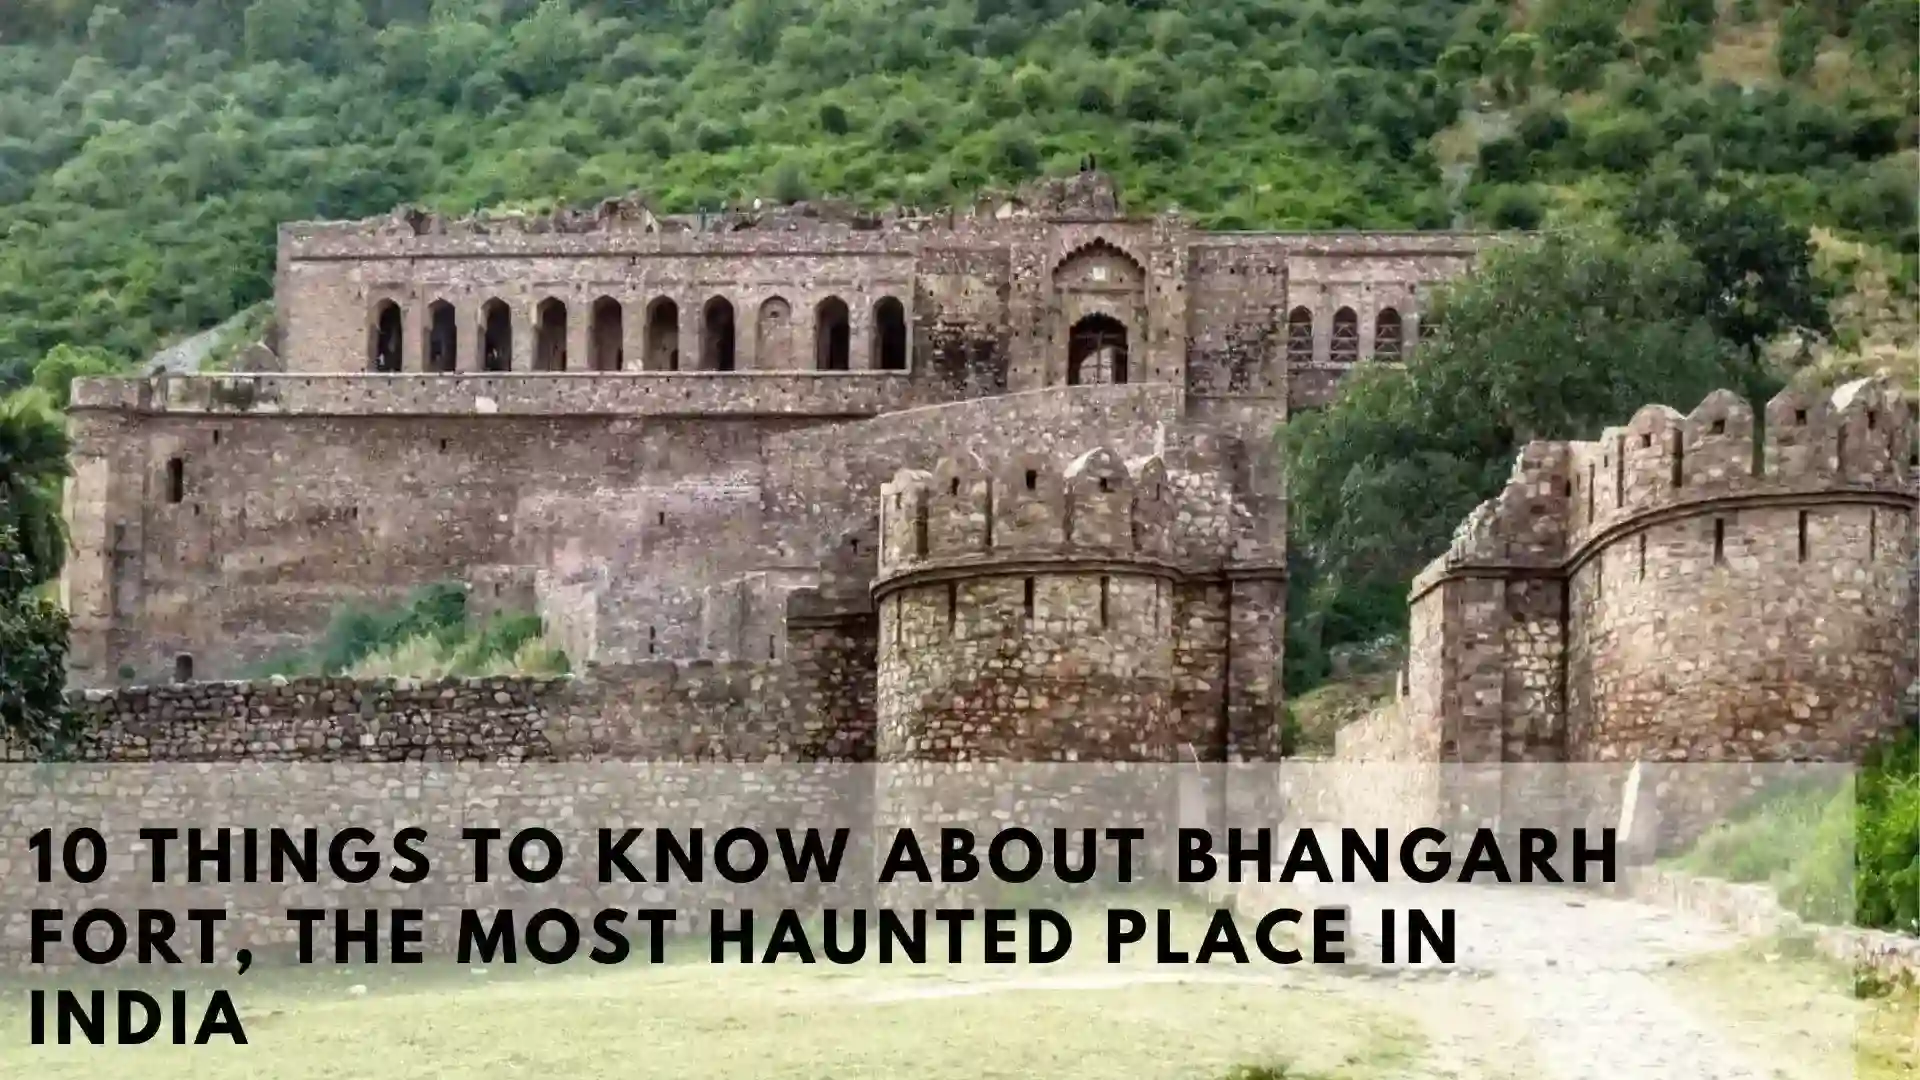 10 Things to Know About Bhangarh Fort, The Most Haunted Place in India 